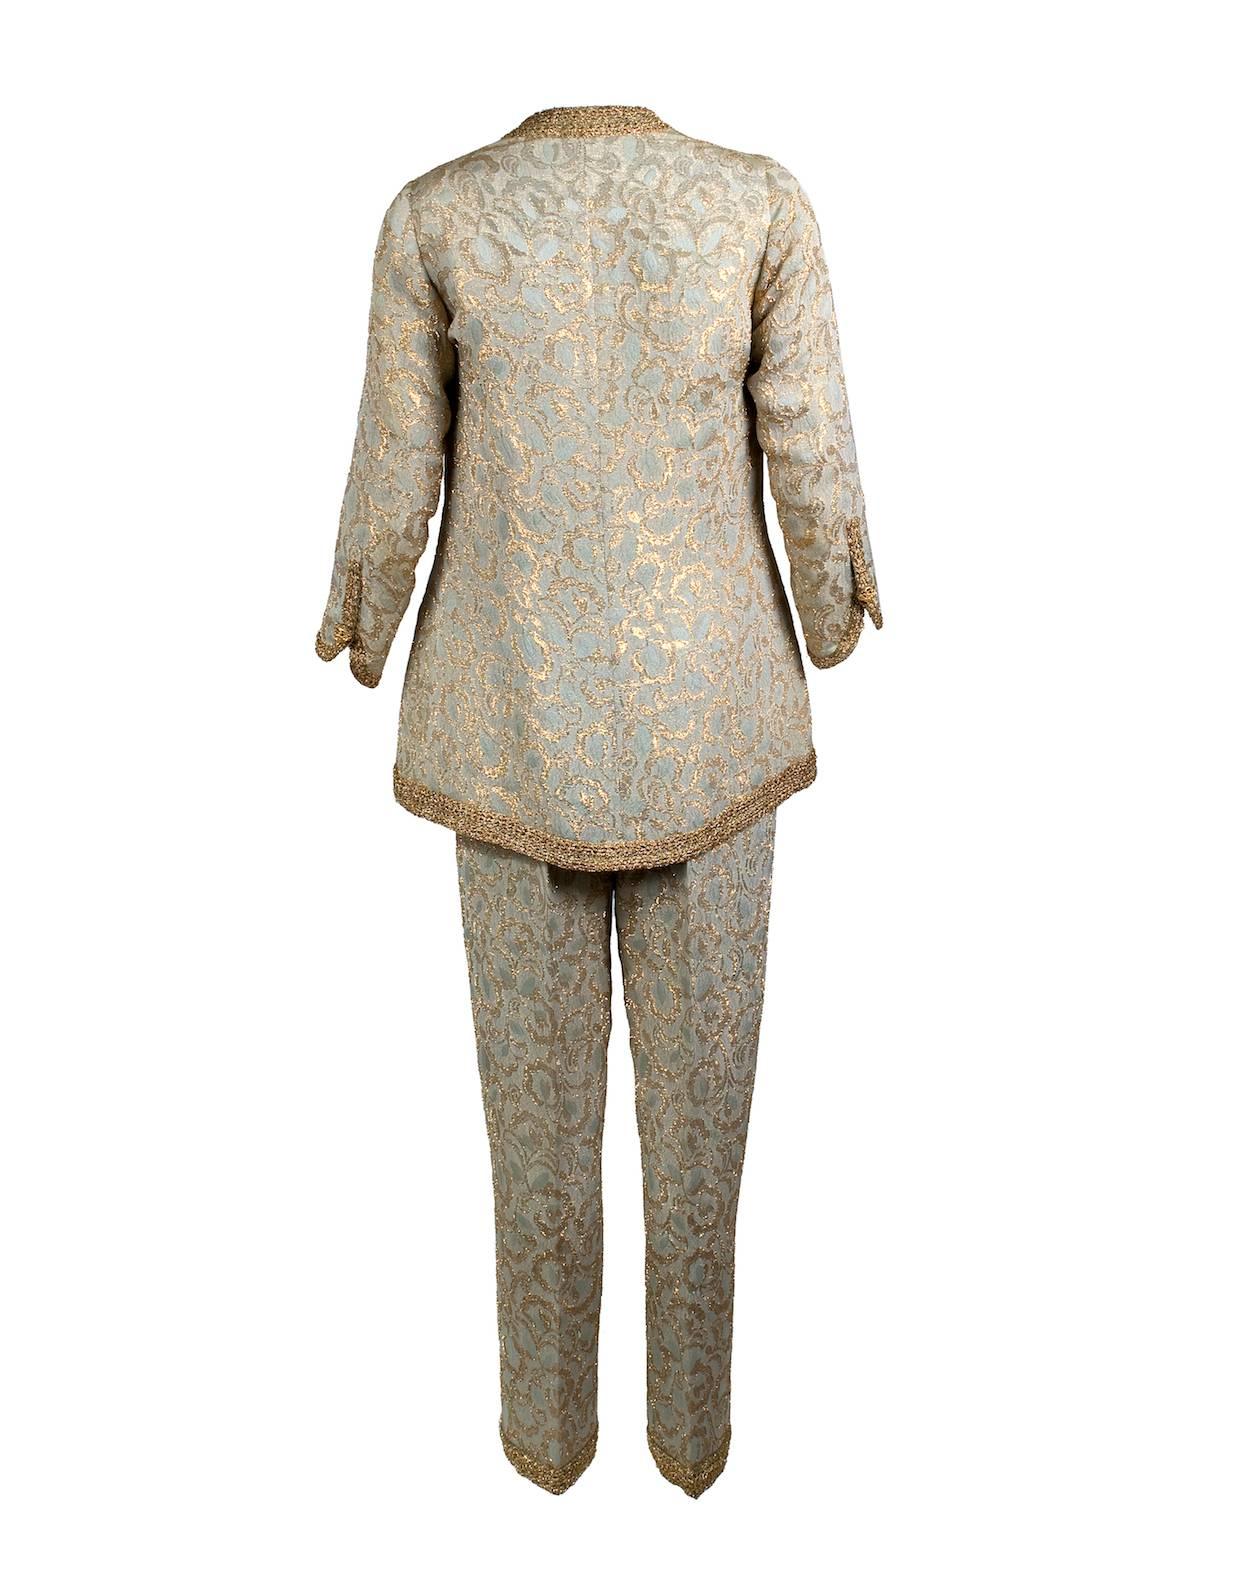 This is a pant suit by Chanel c. 1960s/70s  It is made from a baby blue and gold brocade fabric. It features a thick gold trim and has a matching baby blue satin lining.
13" shoulder to shoulder
20" sleeve length
Jacket bust is